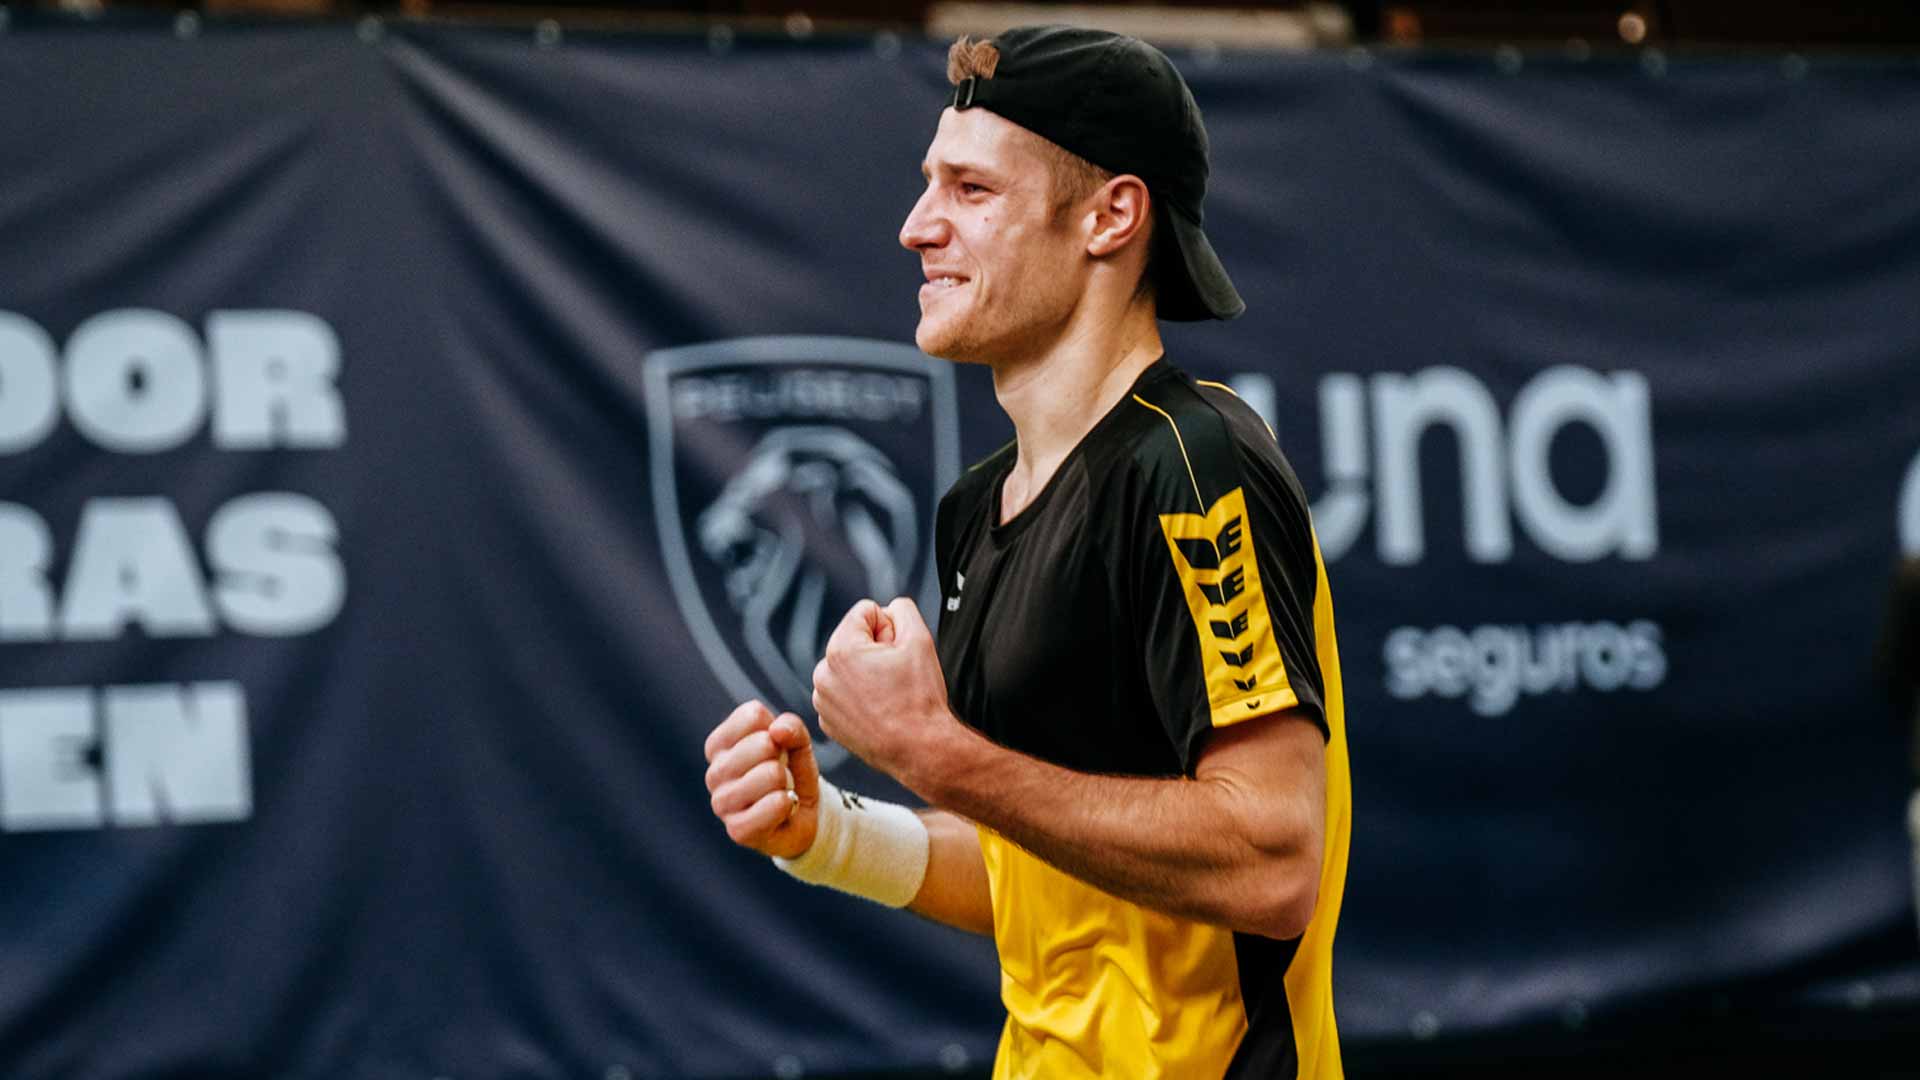 After Seven Surgeries, De Loore Rebuilds Body & Career For First Challenger Title | Sports Opinion